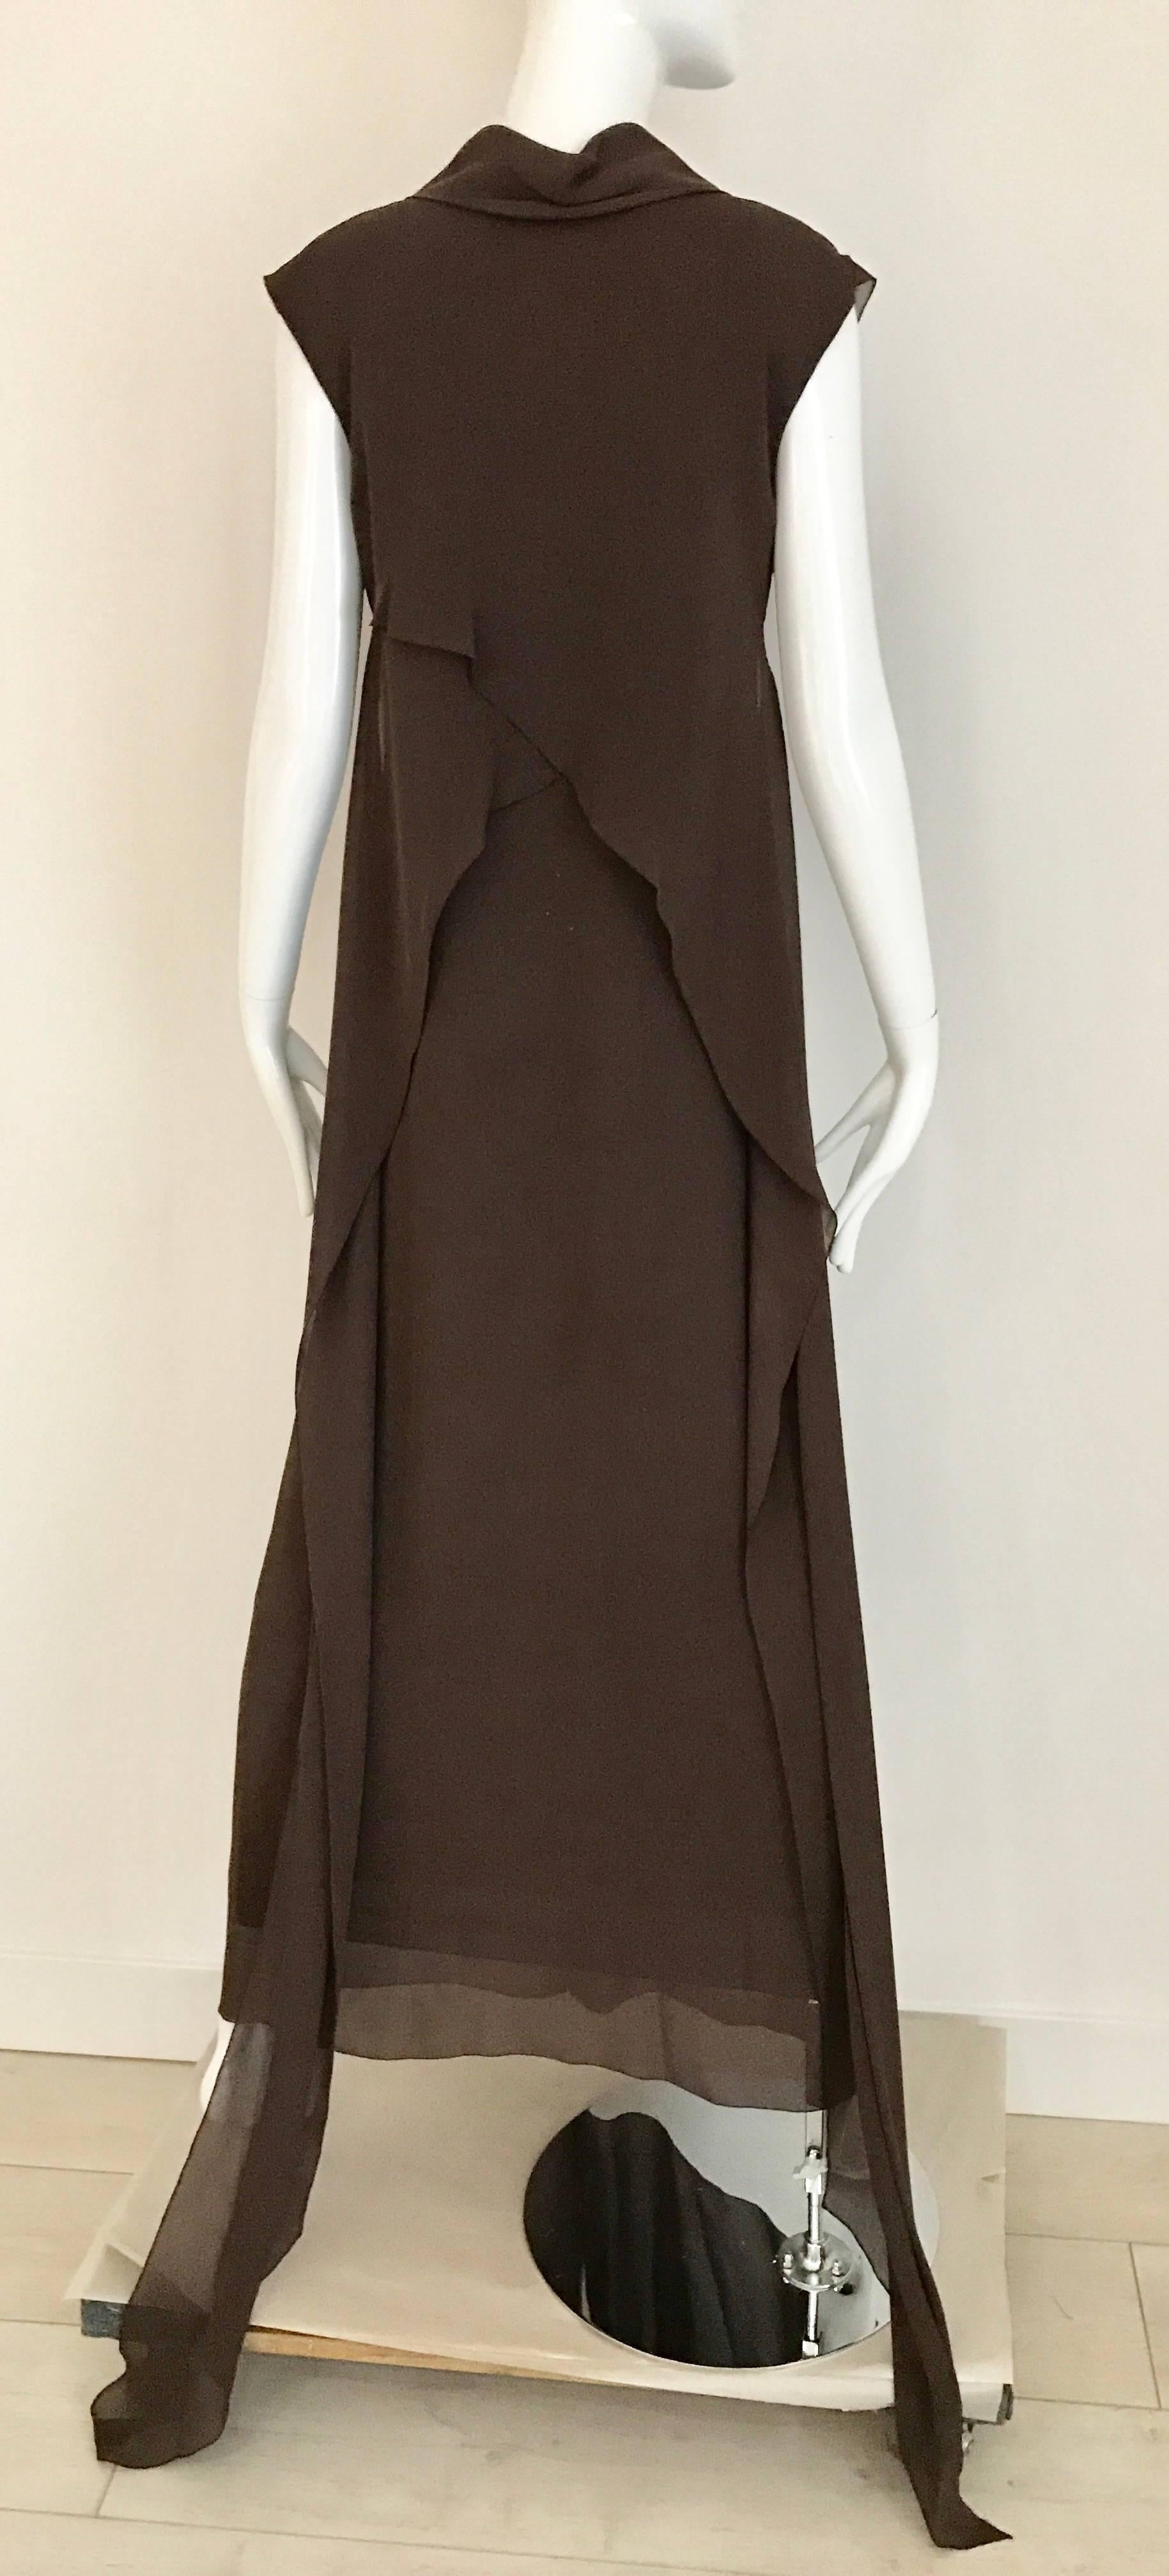 1990s CHANEL Brown Crepe Dress with Sleeveless Overlay Long Vest 1